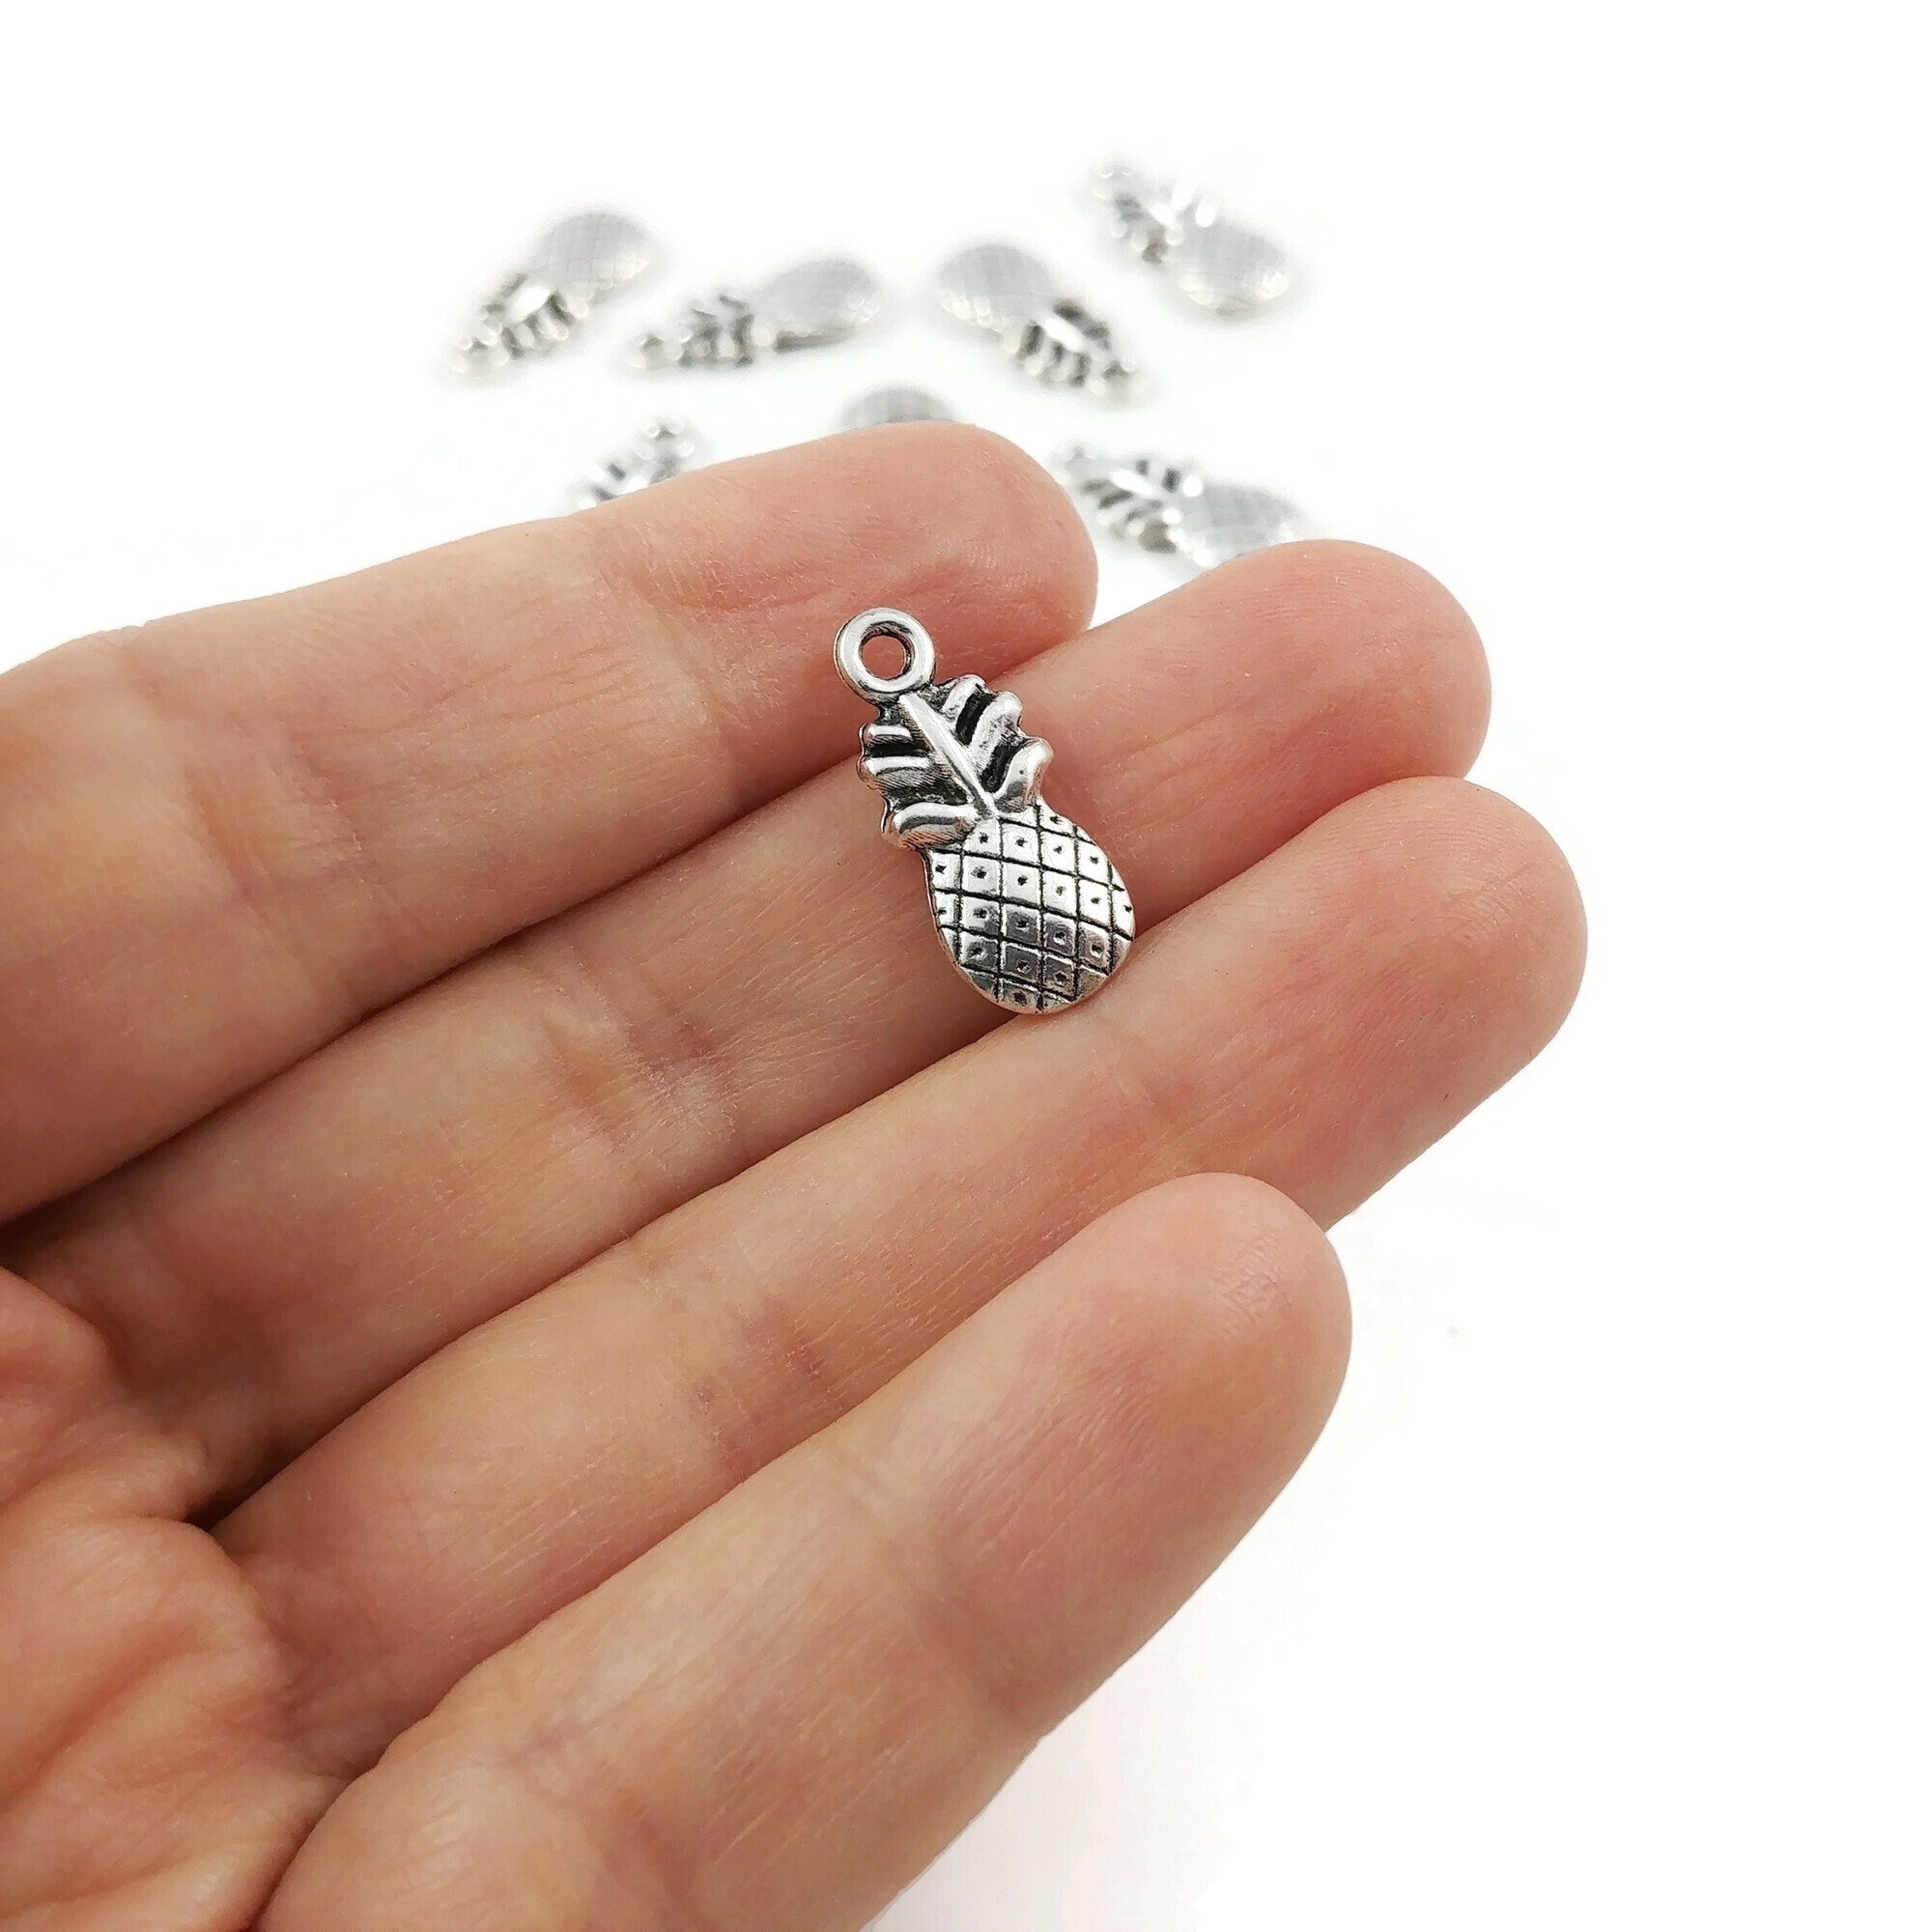 Tiny black crystal charms, 15mm nickel free pendant for jewelry making